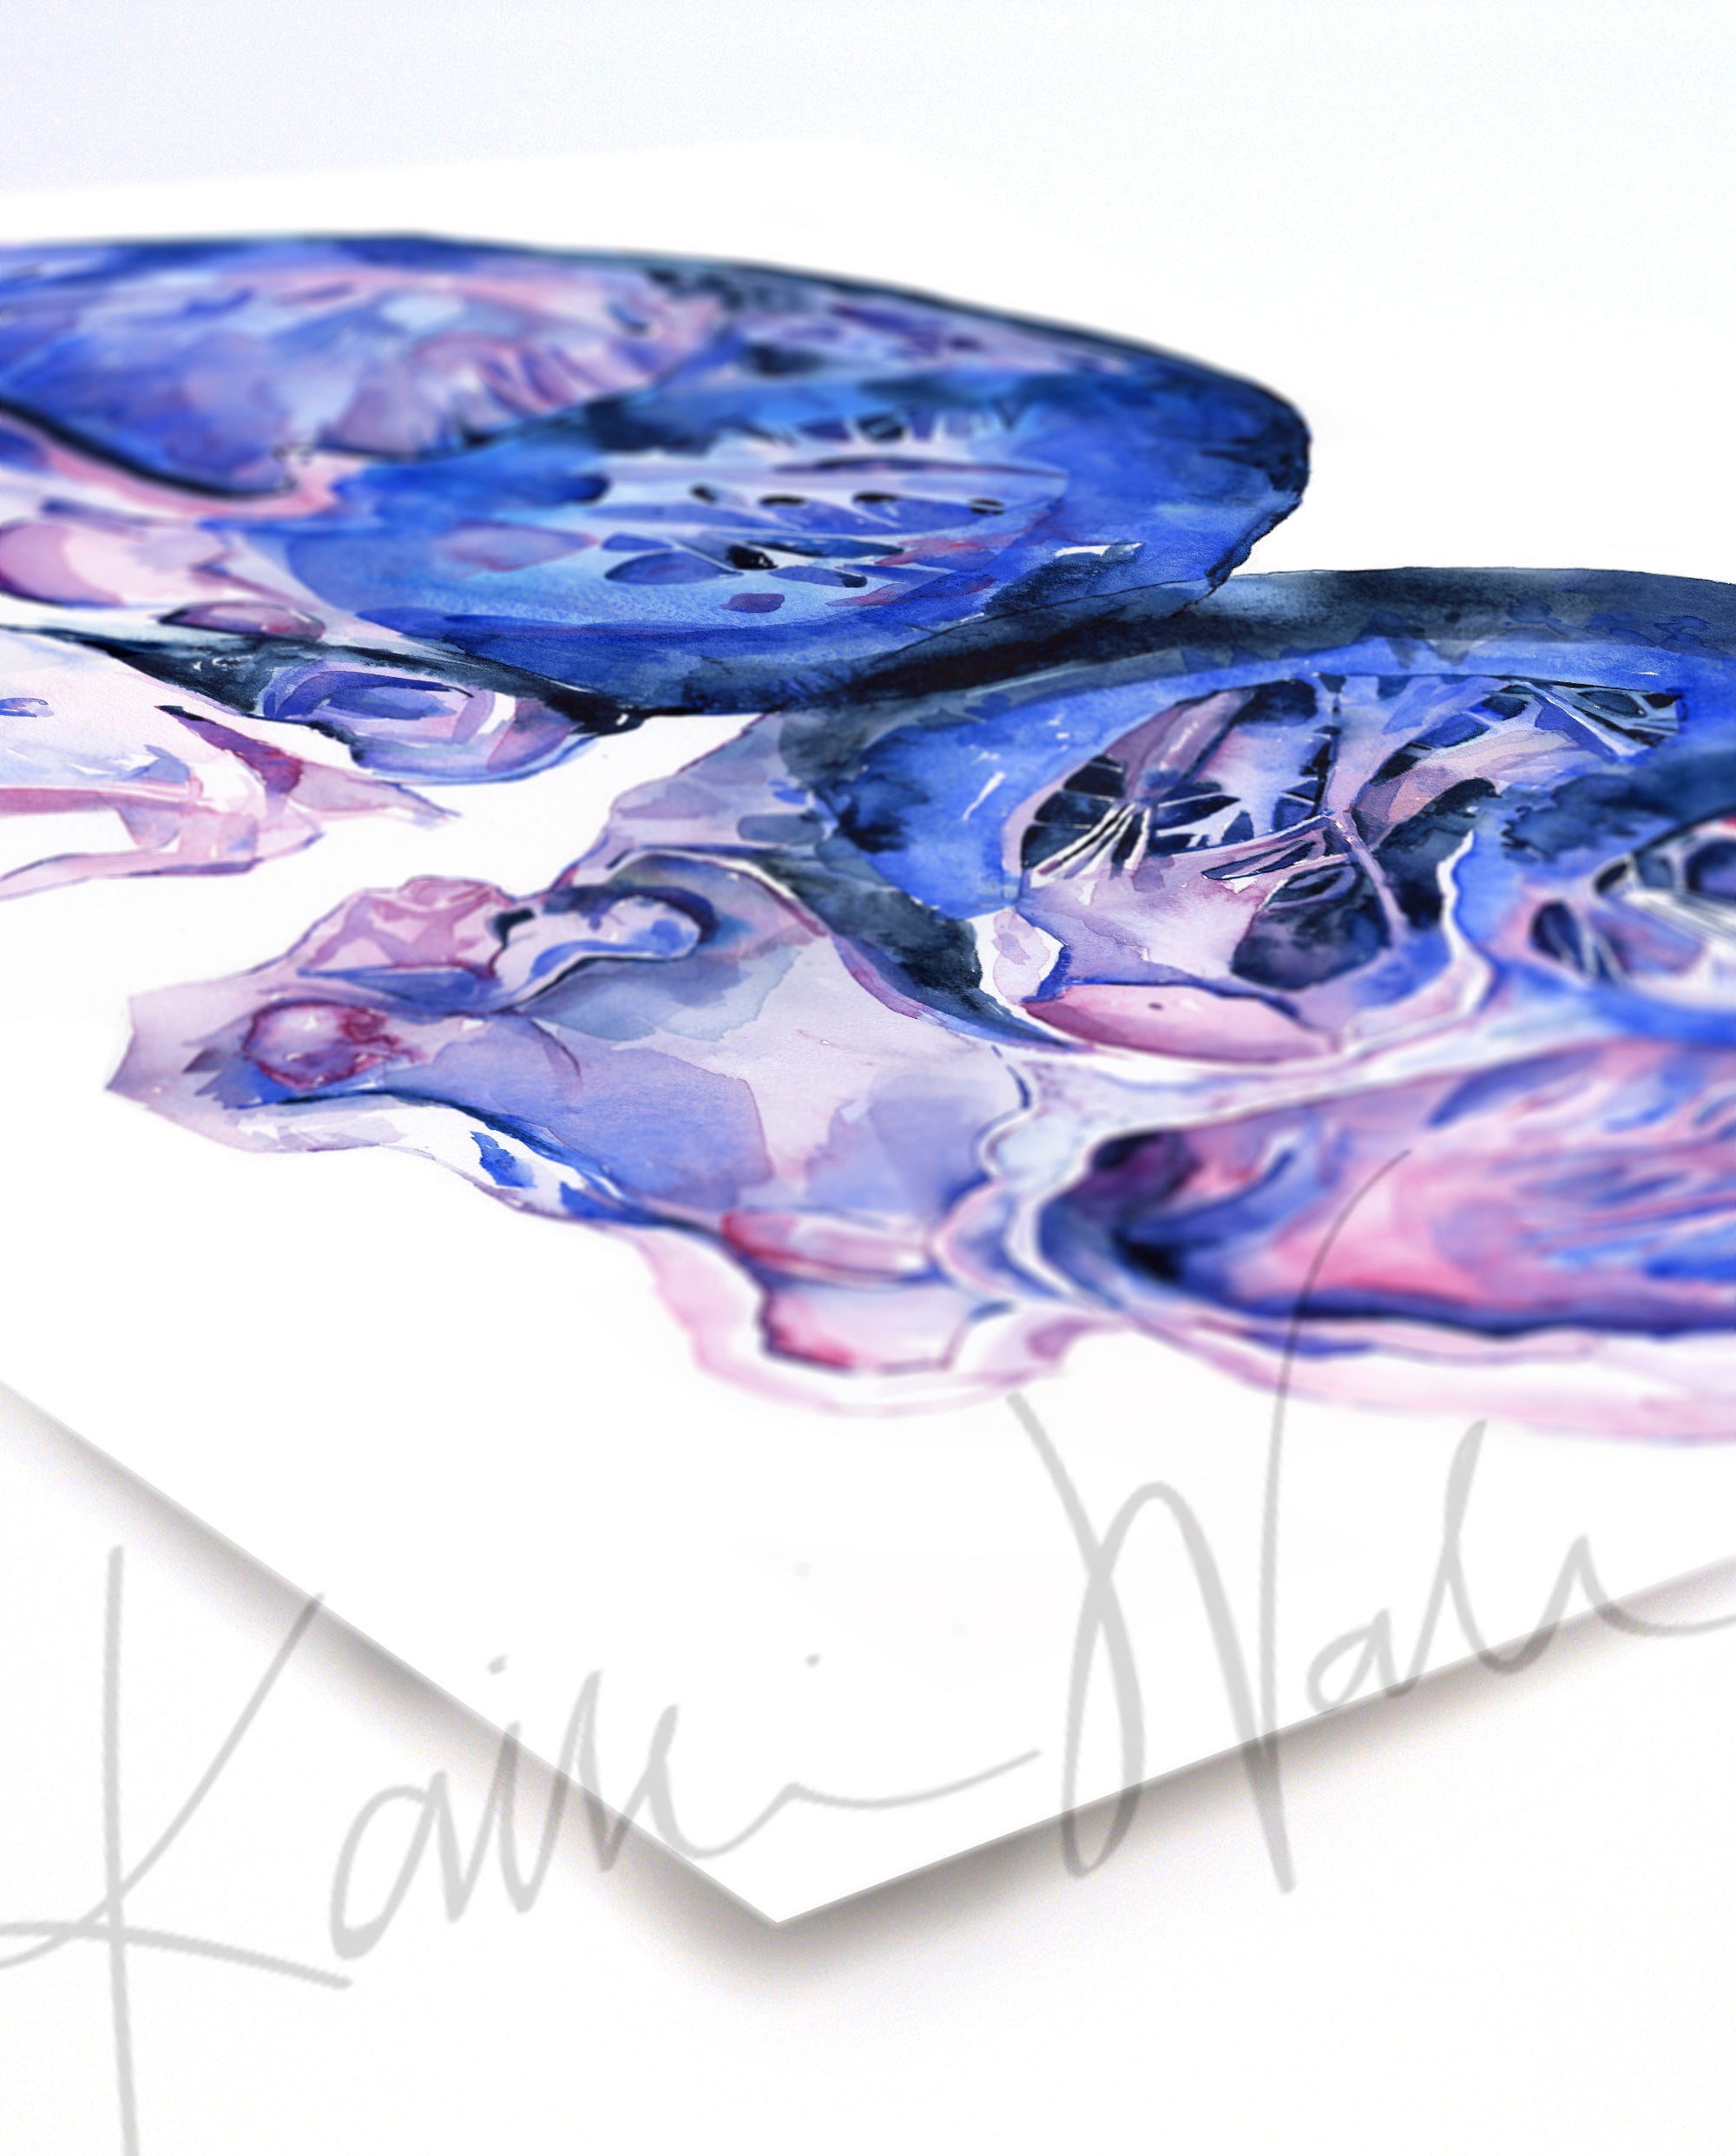 Unframed watercolor painting of a heart dissection in pinks, purples, and vibrant blues. The painting is at an angle.